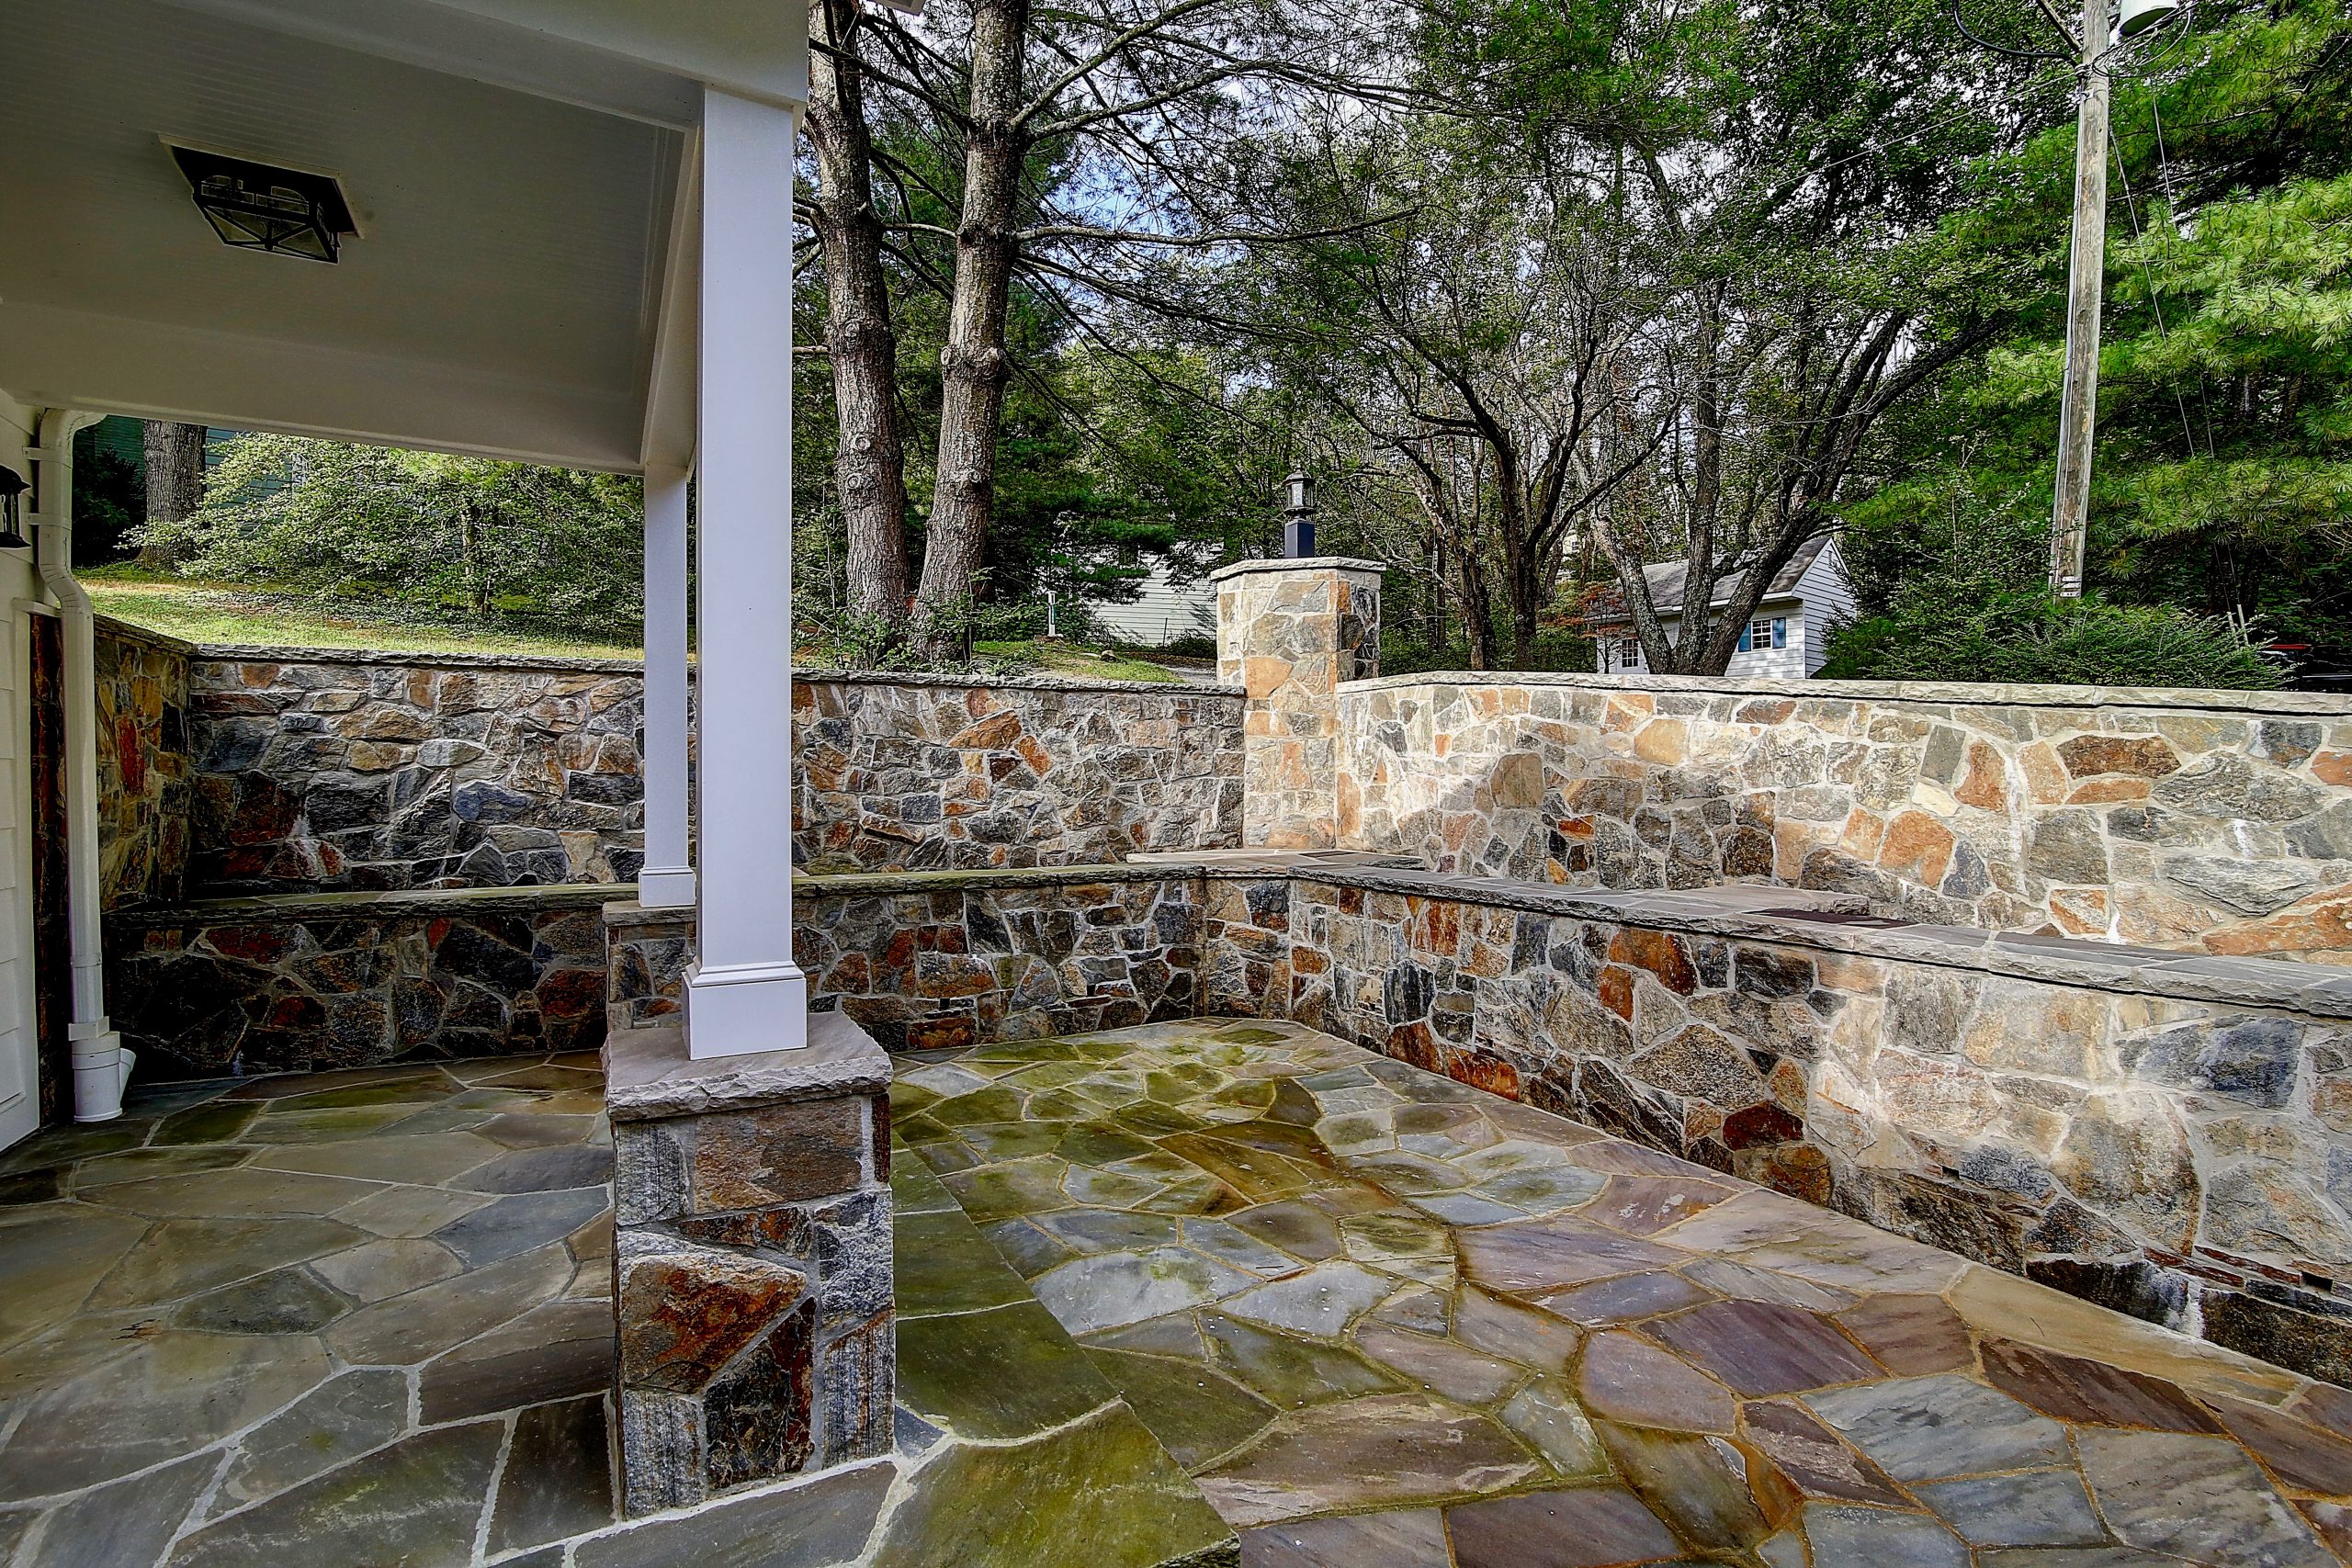 sunken patio with natural stone walls and floor